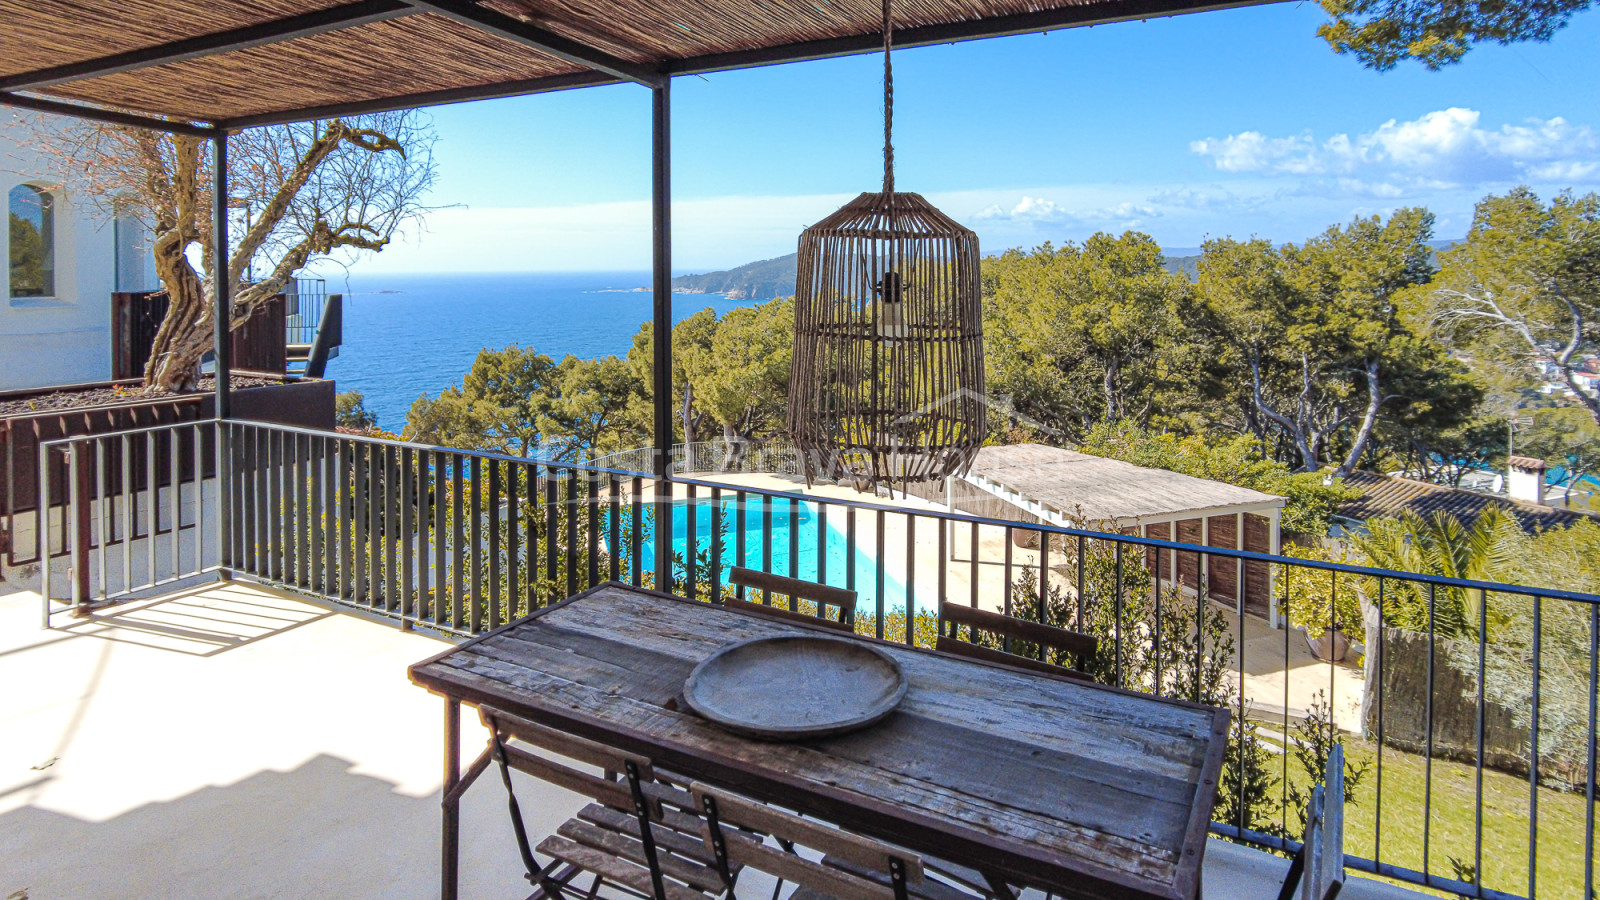 Luxurious and elegant villa in Llafranc with stunning sea views